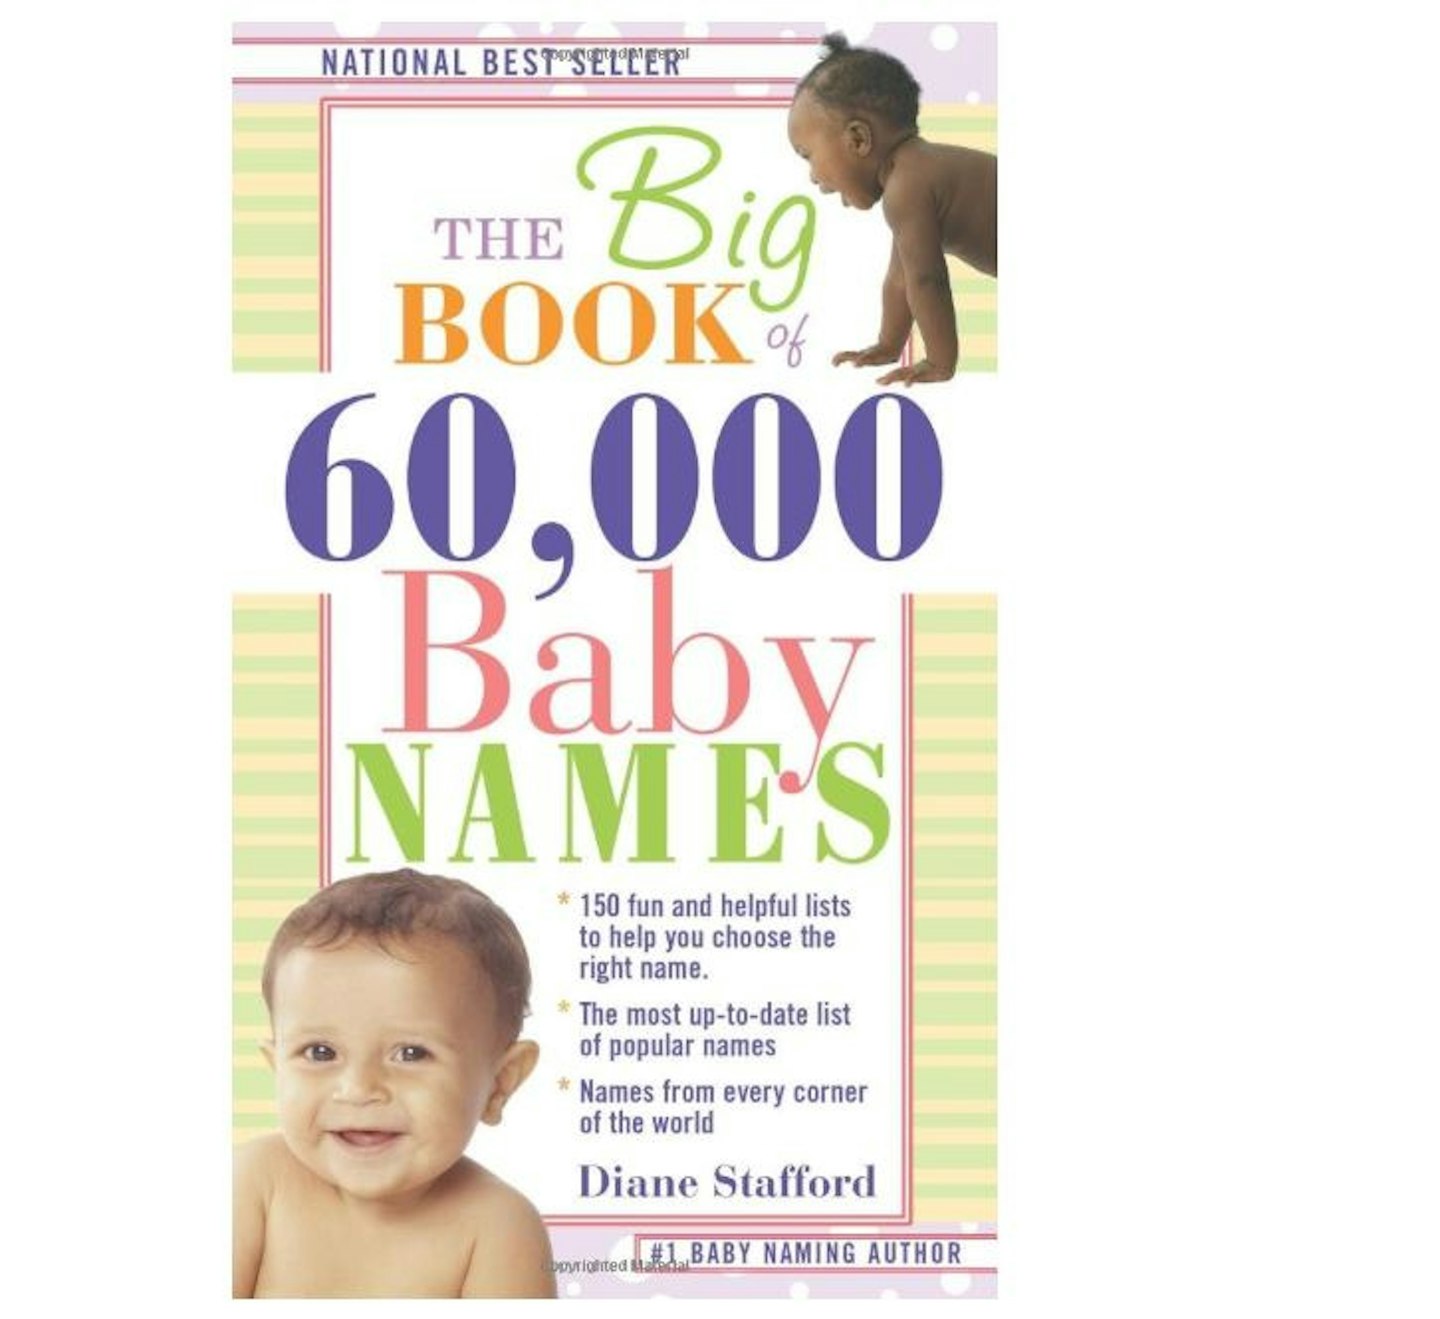 The Big Book of 60,000 Baby Names, 5.58